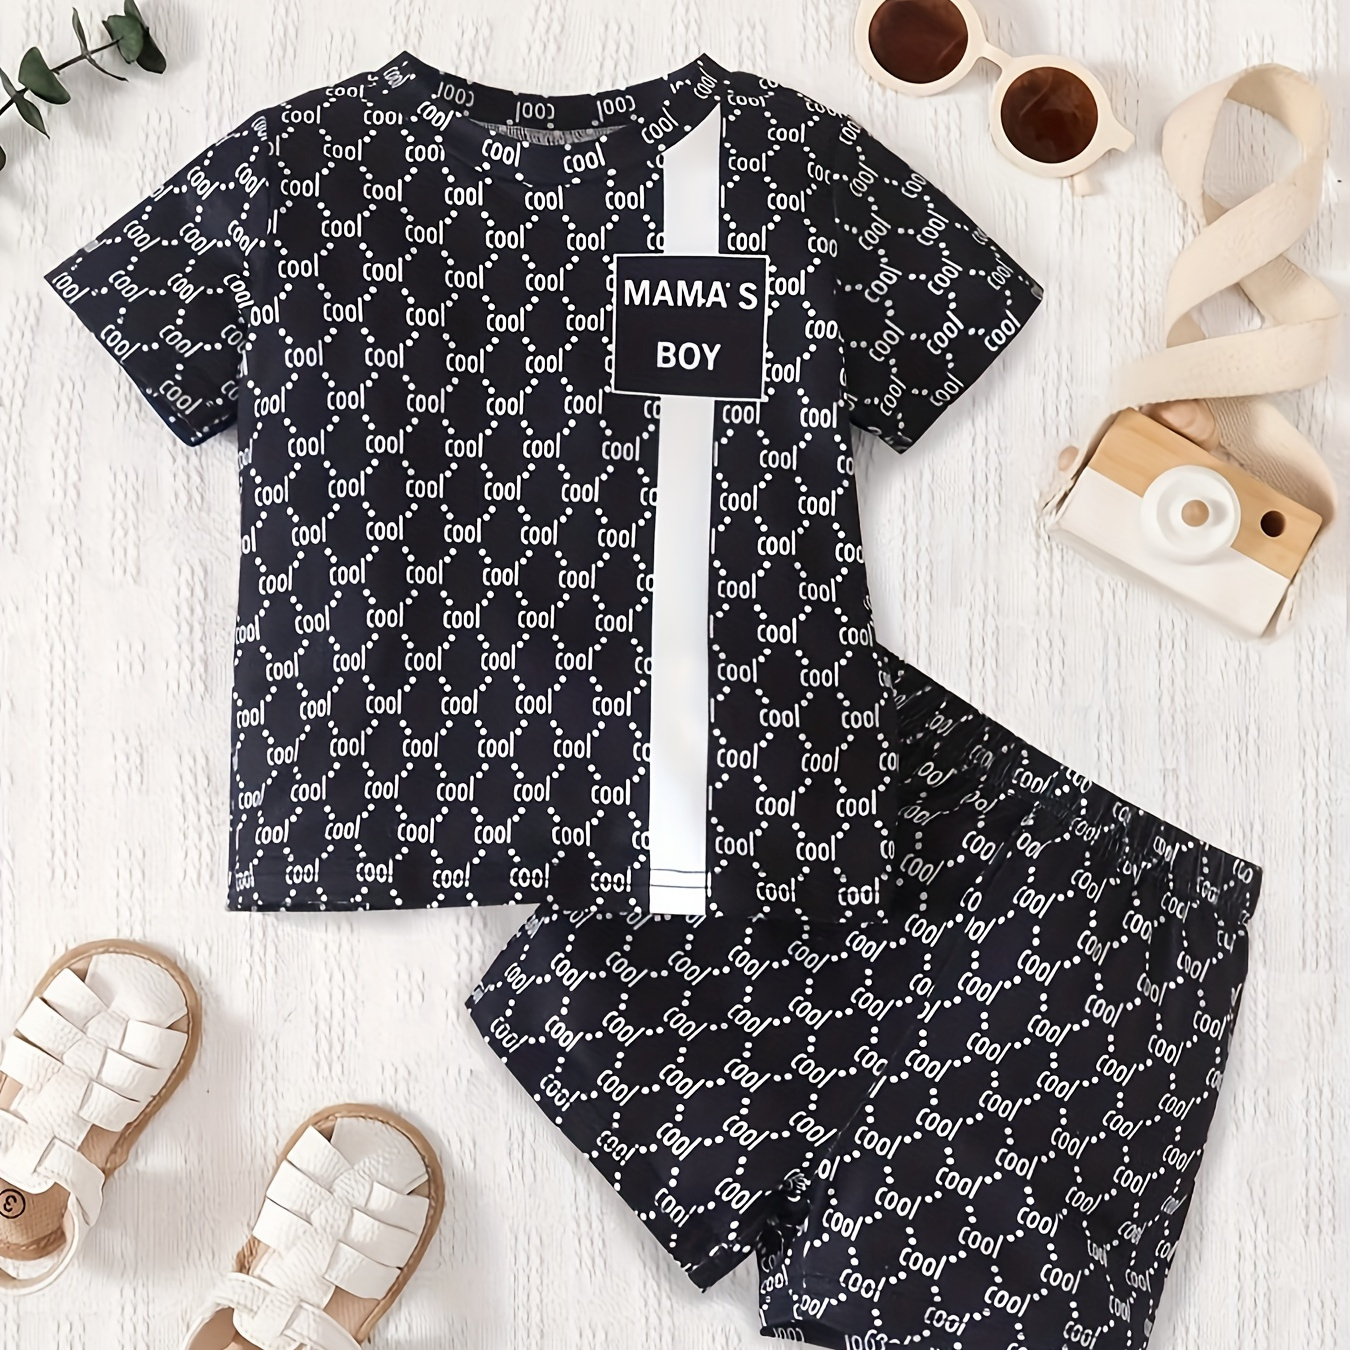 

2-piece Baby Boys Summer Outfit Set, "mama's Boy" Cool Letter Print, Casual Short Sleeve Shirt With Matching Shorts, Fashionable And Versatile Toddler Clothing For Outdoor Activities